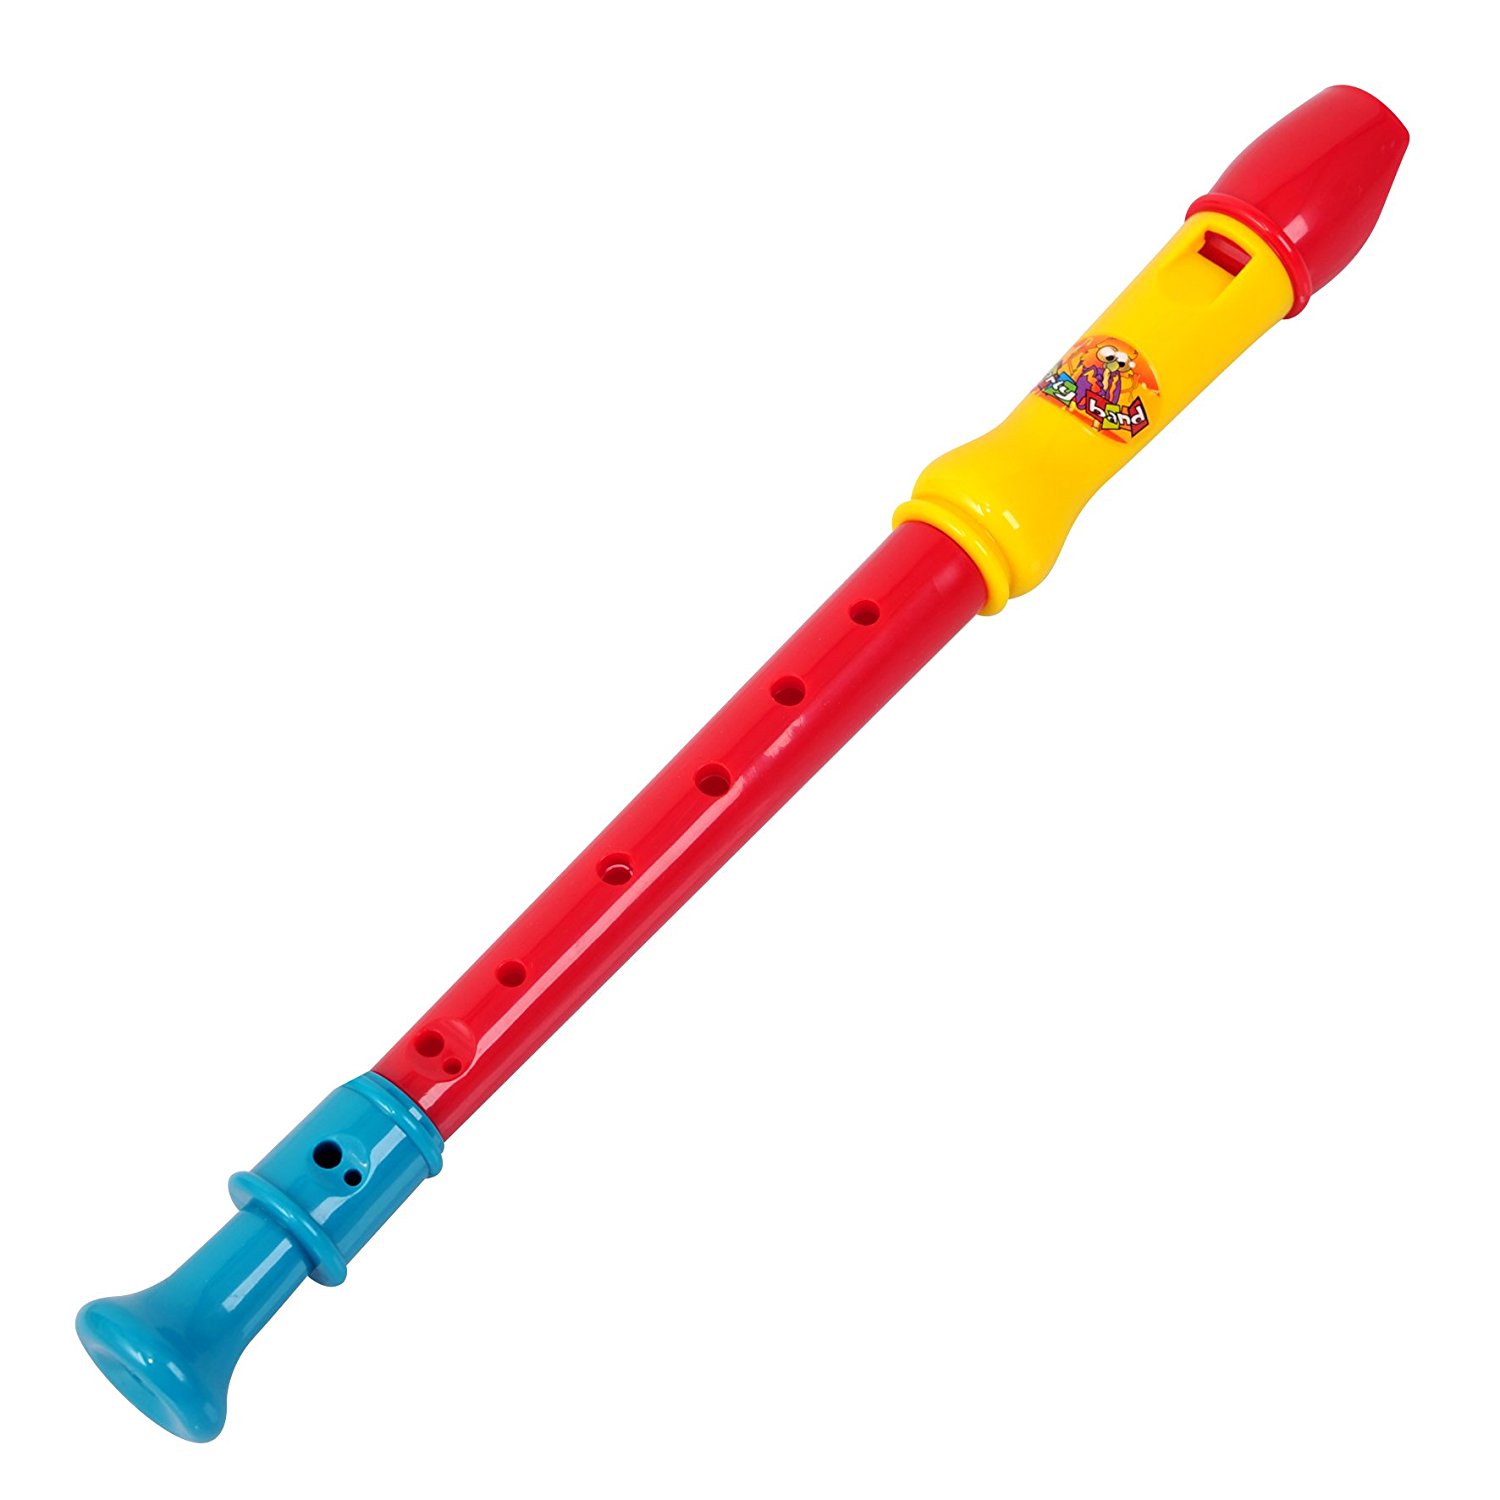 PlayGo Flute for Kids: Amazon.co.uk: Toys & Games